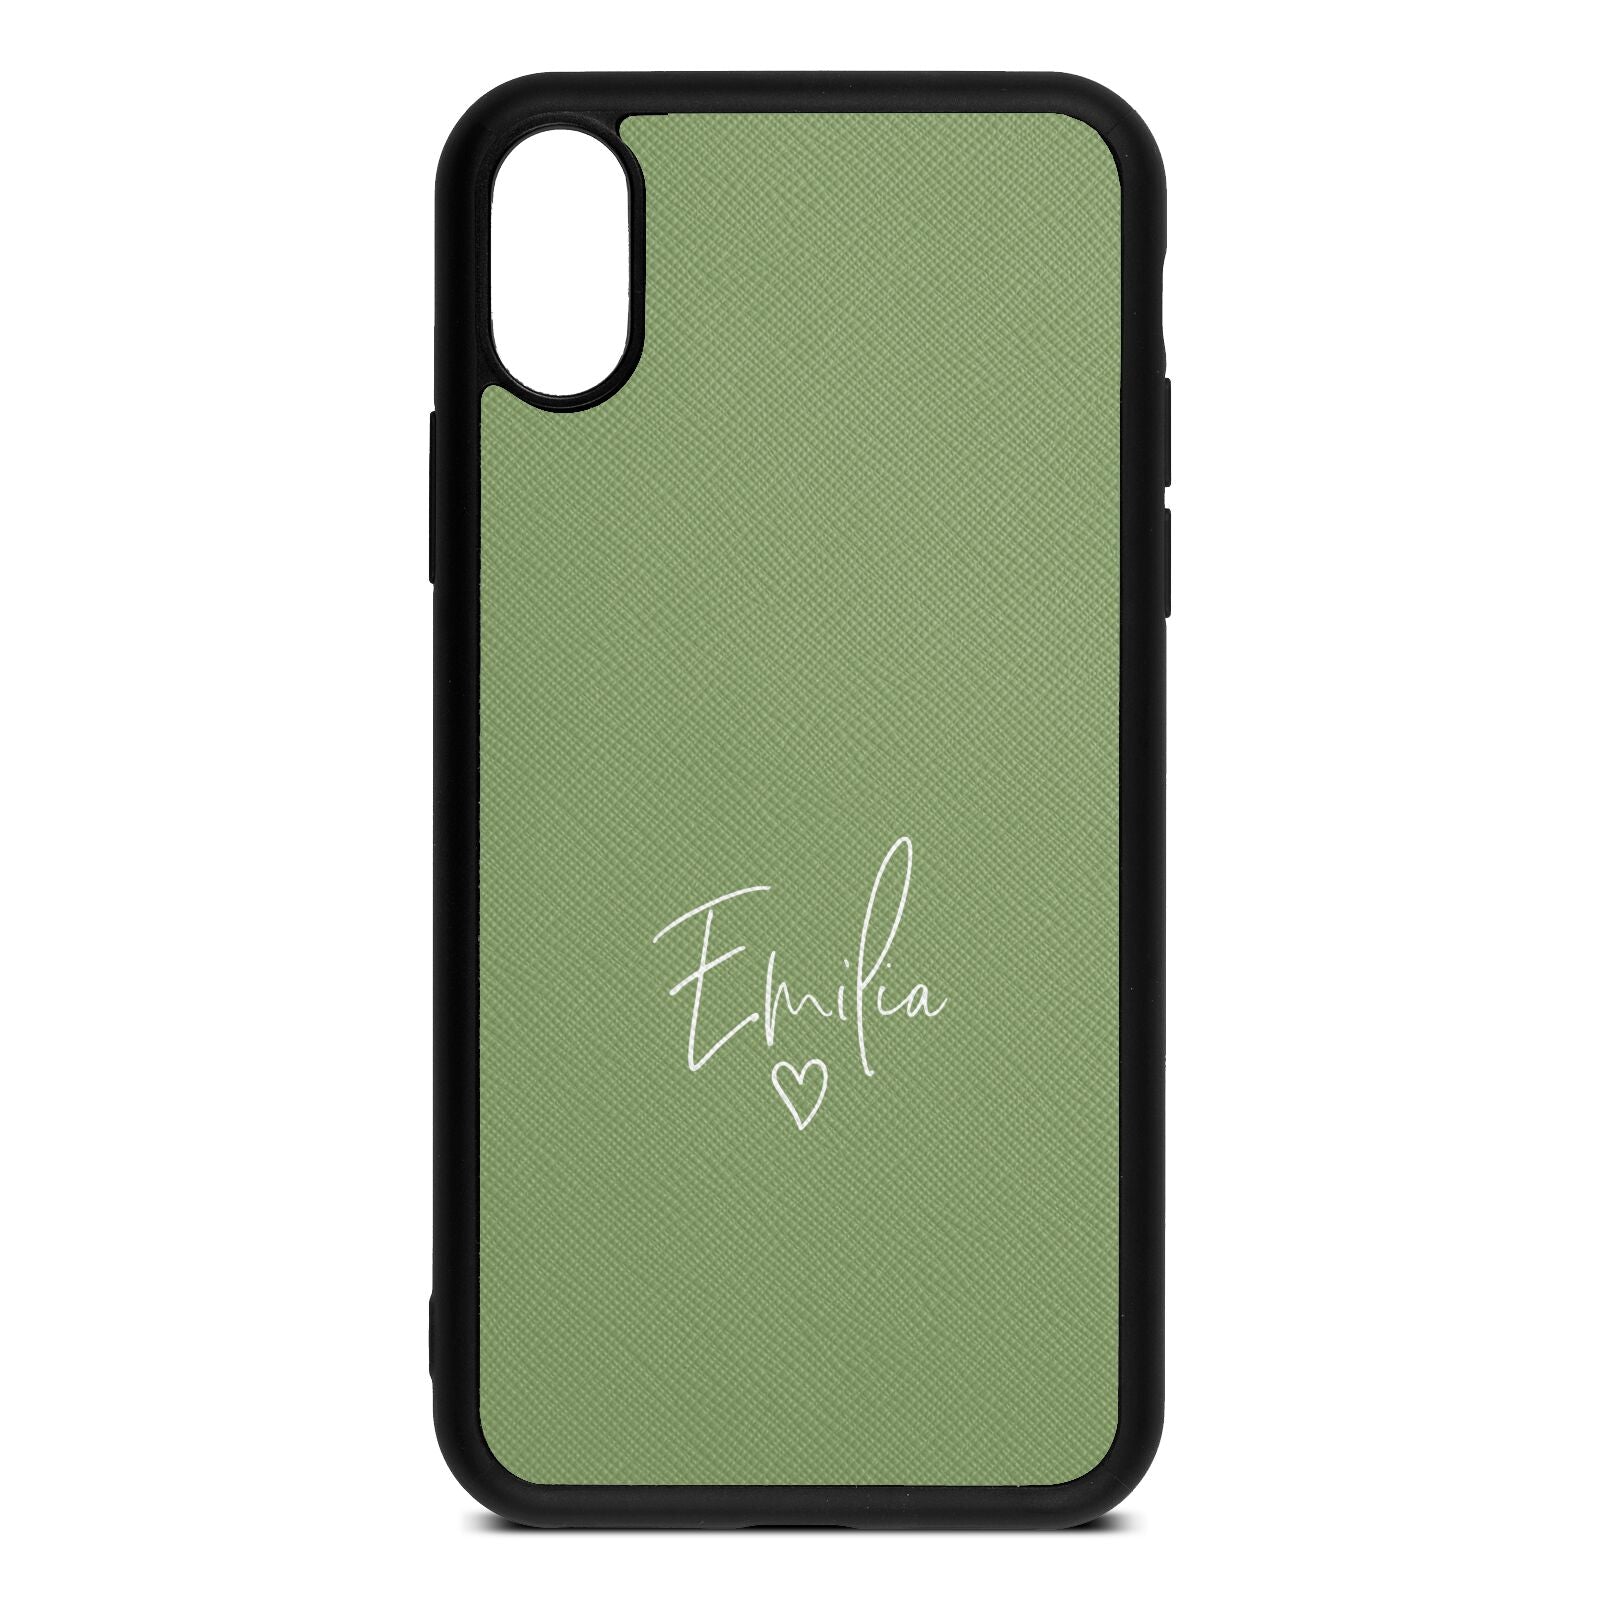 White Handwritten Name Transparent Lime Saffiano Leather iPhone Xs Case